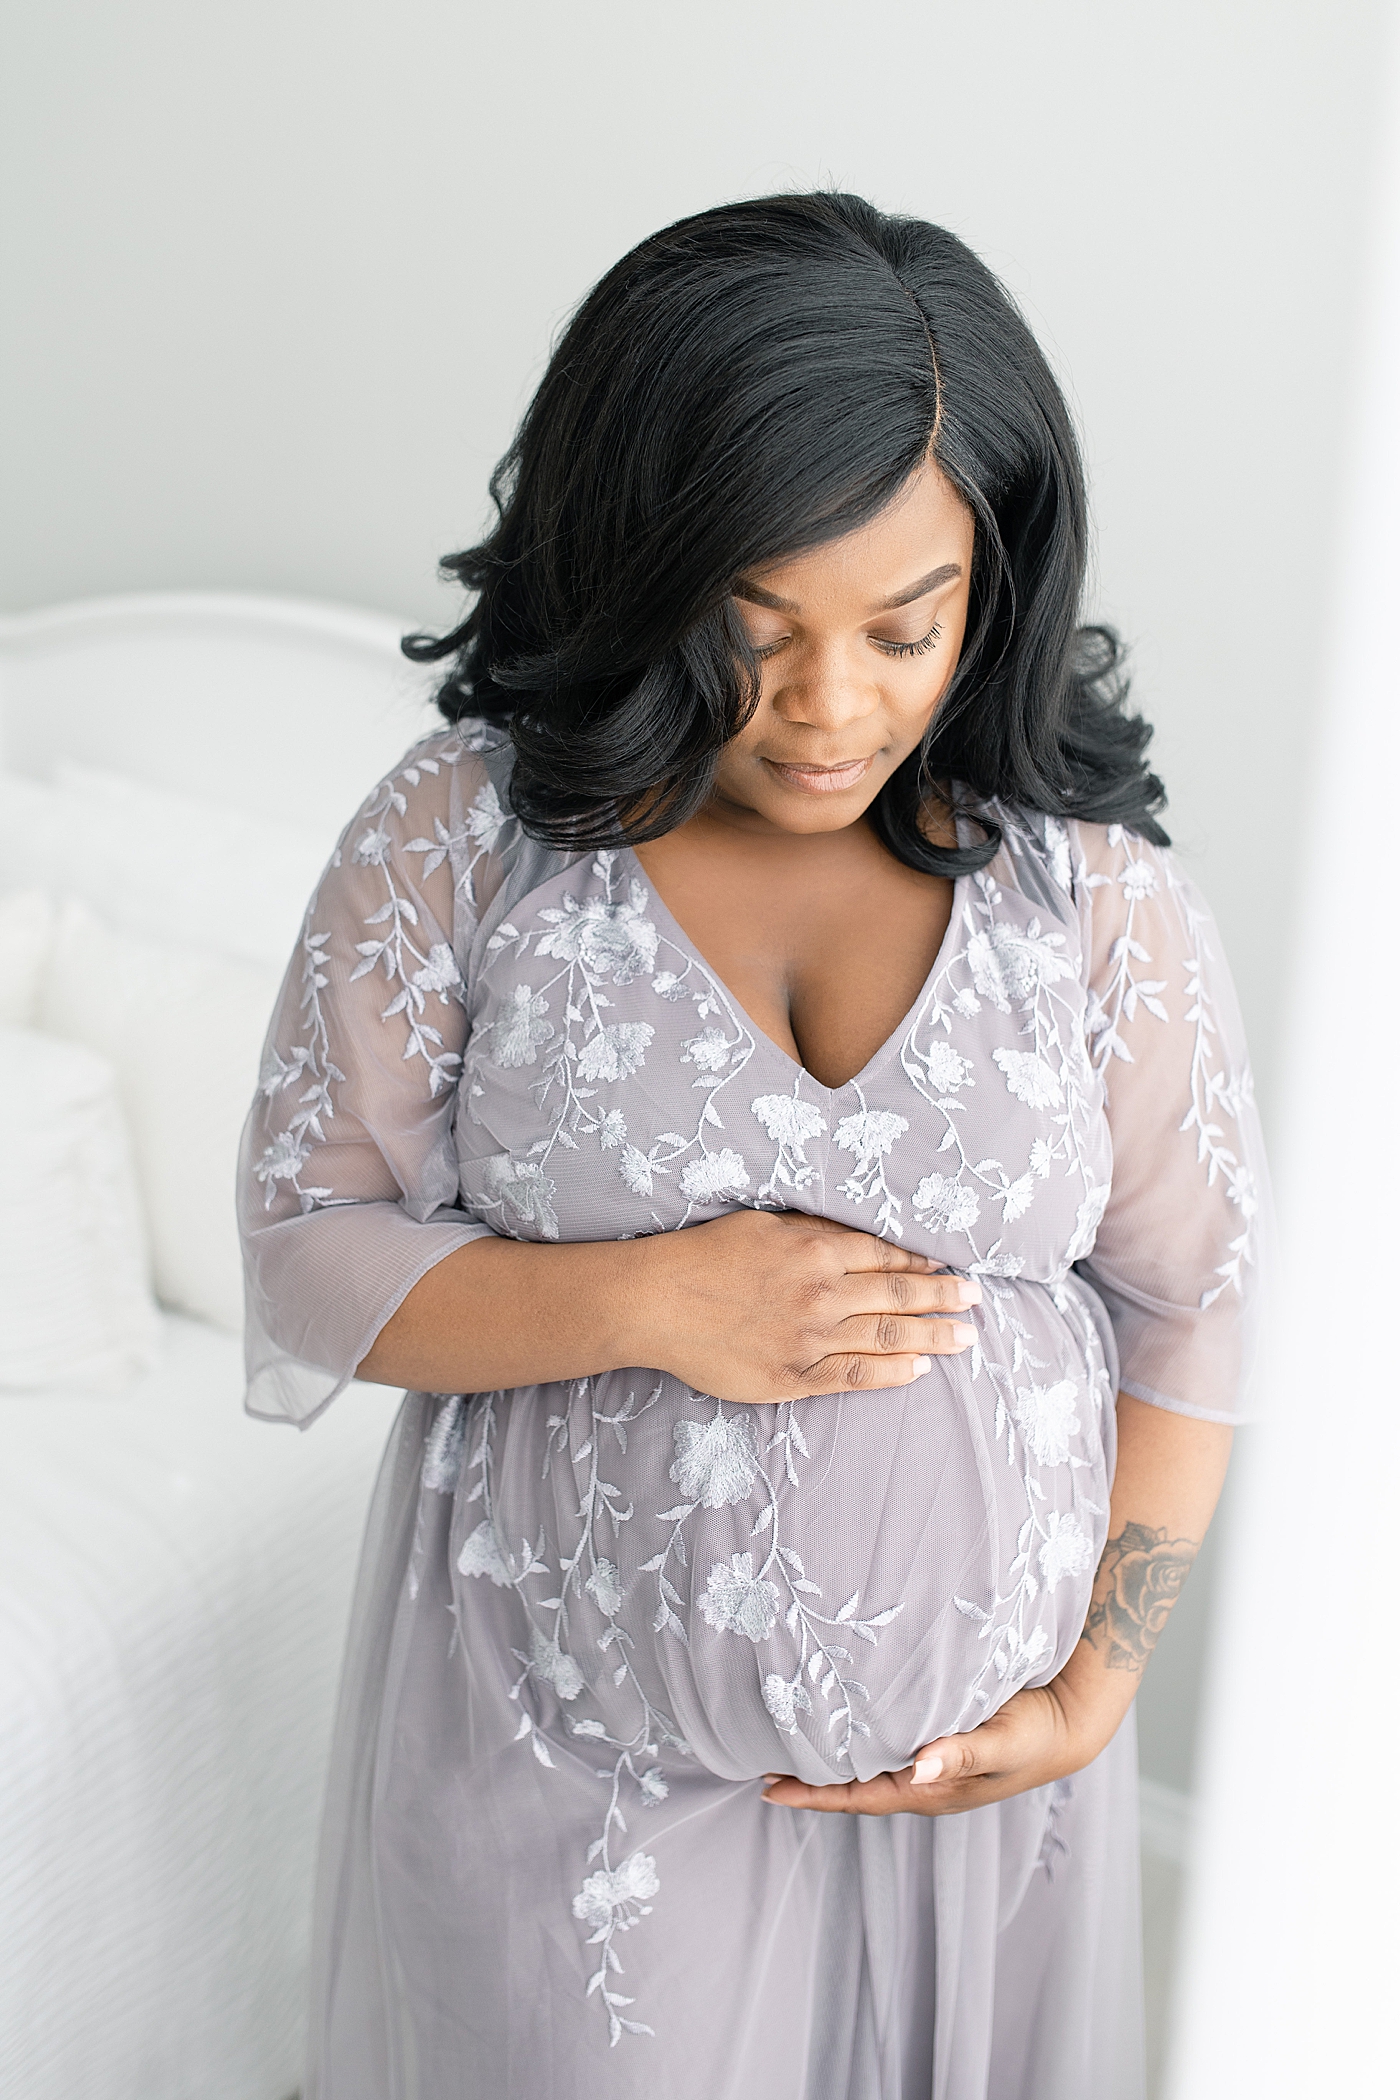 Mother to be looking down at her belly | Photo by Bay St. Louis Maternity Photographer Little Sunshine Photography